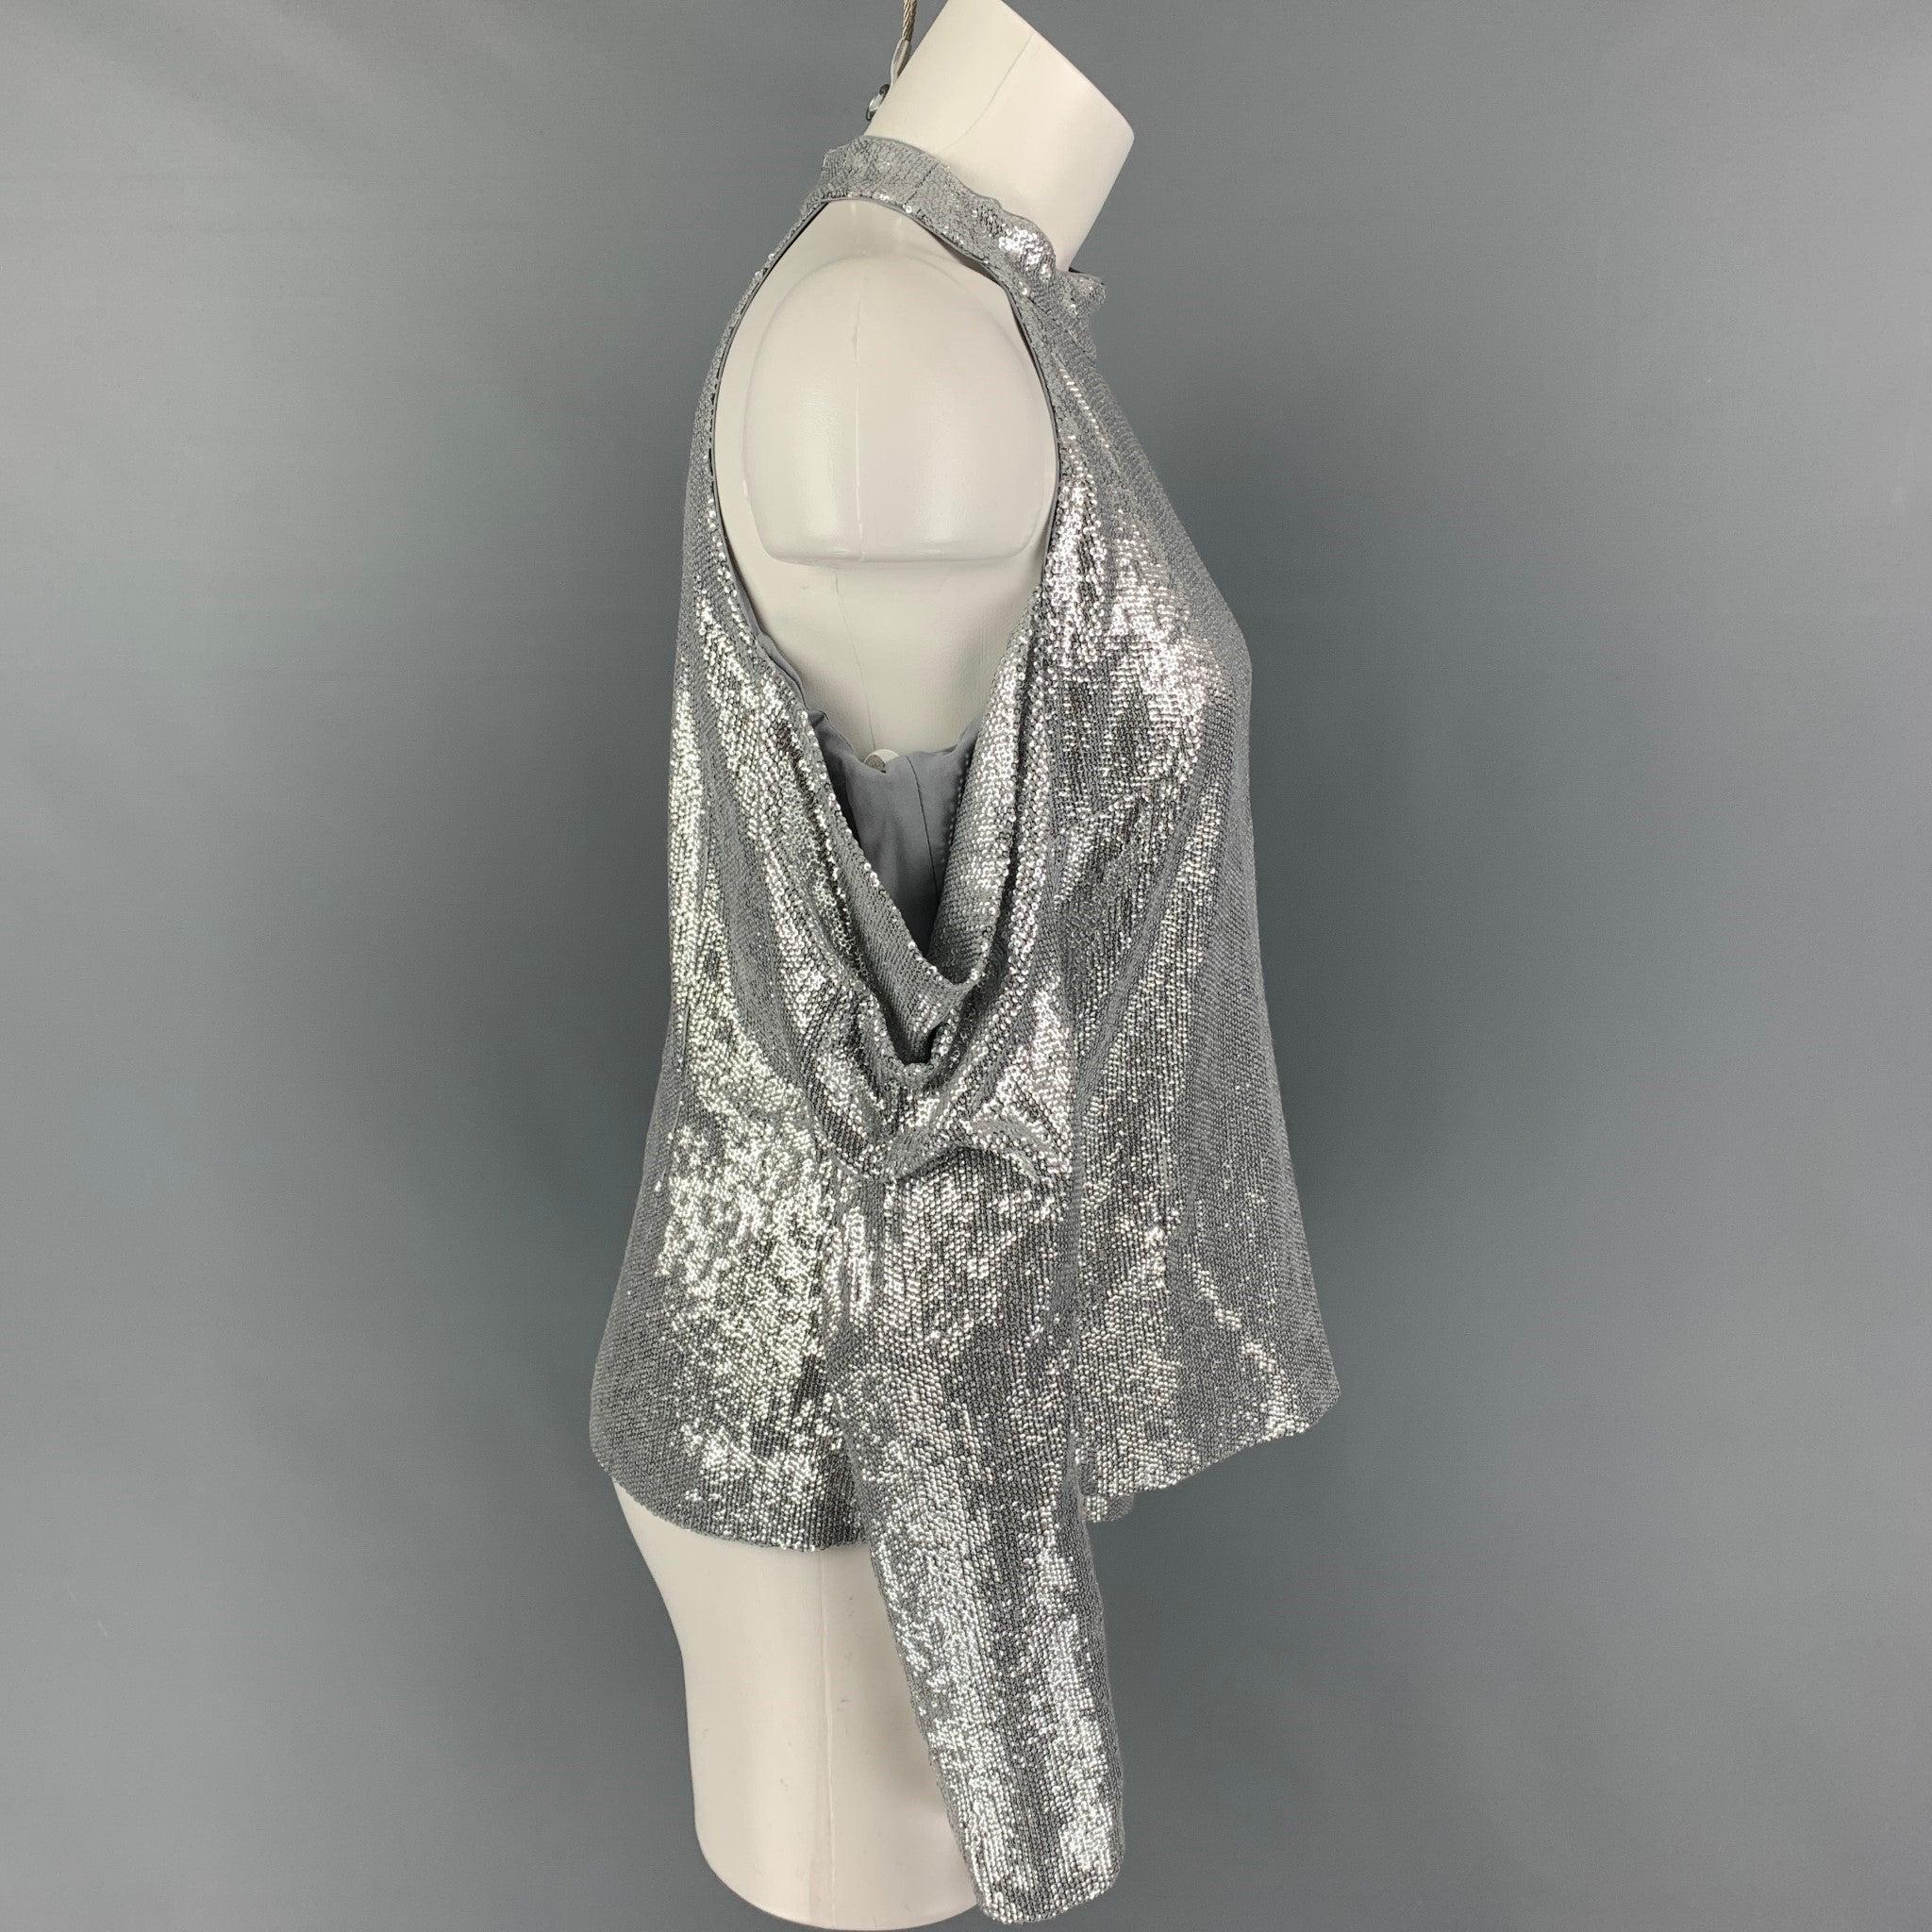 RACHEL ZOE dress top comes in a silver sequined rayon featuring a off-shoulder style, long sleeves, and a back hook & loop closure.
Very Good
Pre-Owned Condition. 

Marked:   8 

Measurements: 
  Bust: 34 inches  Sleeve: 17.5 inches  Length: 22.5